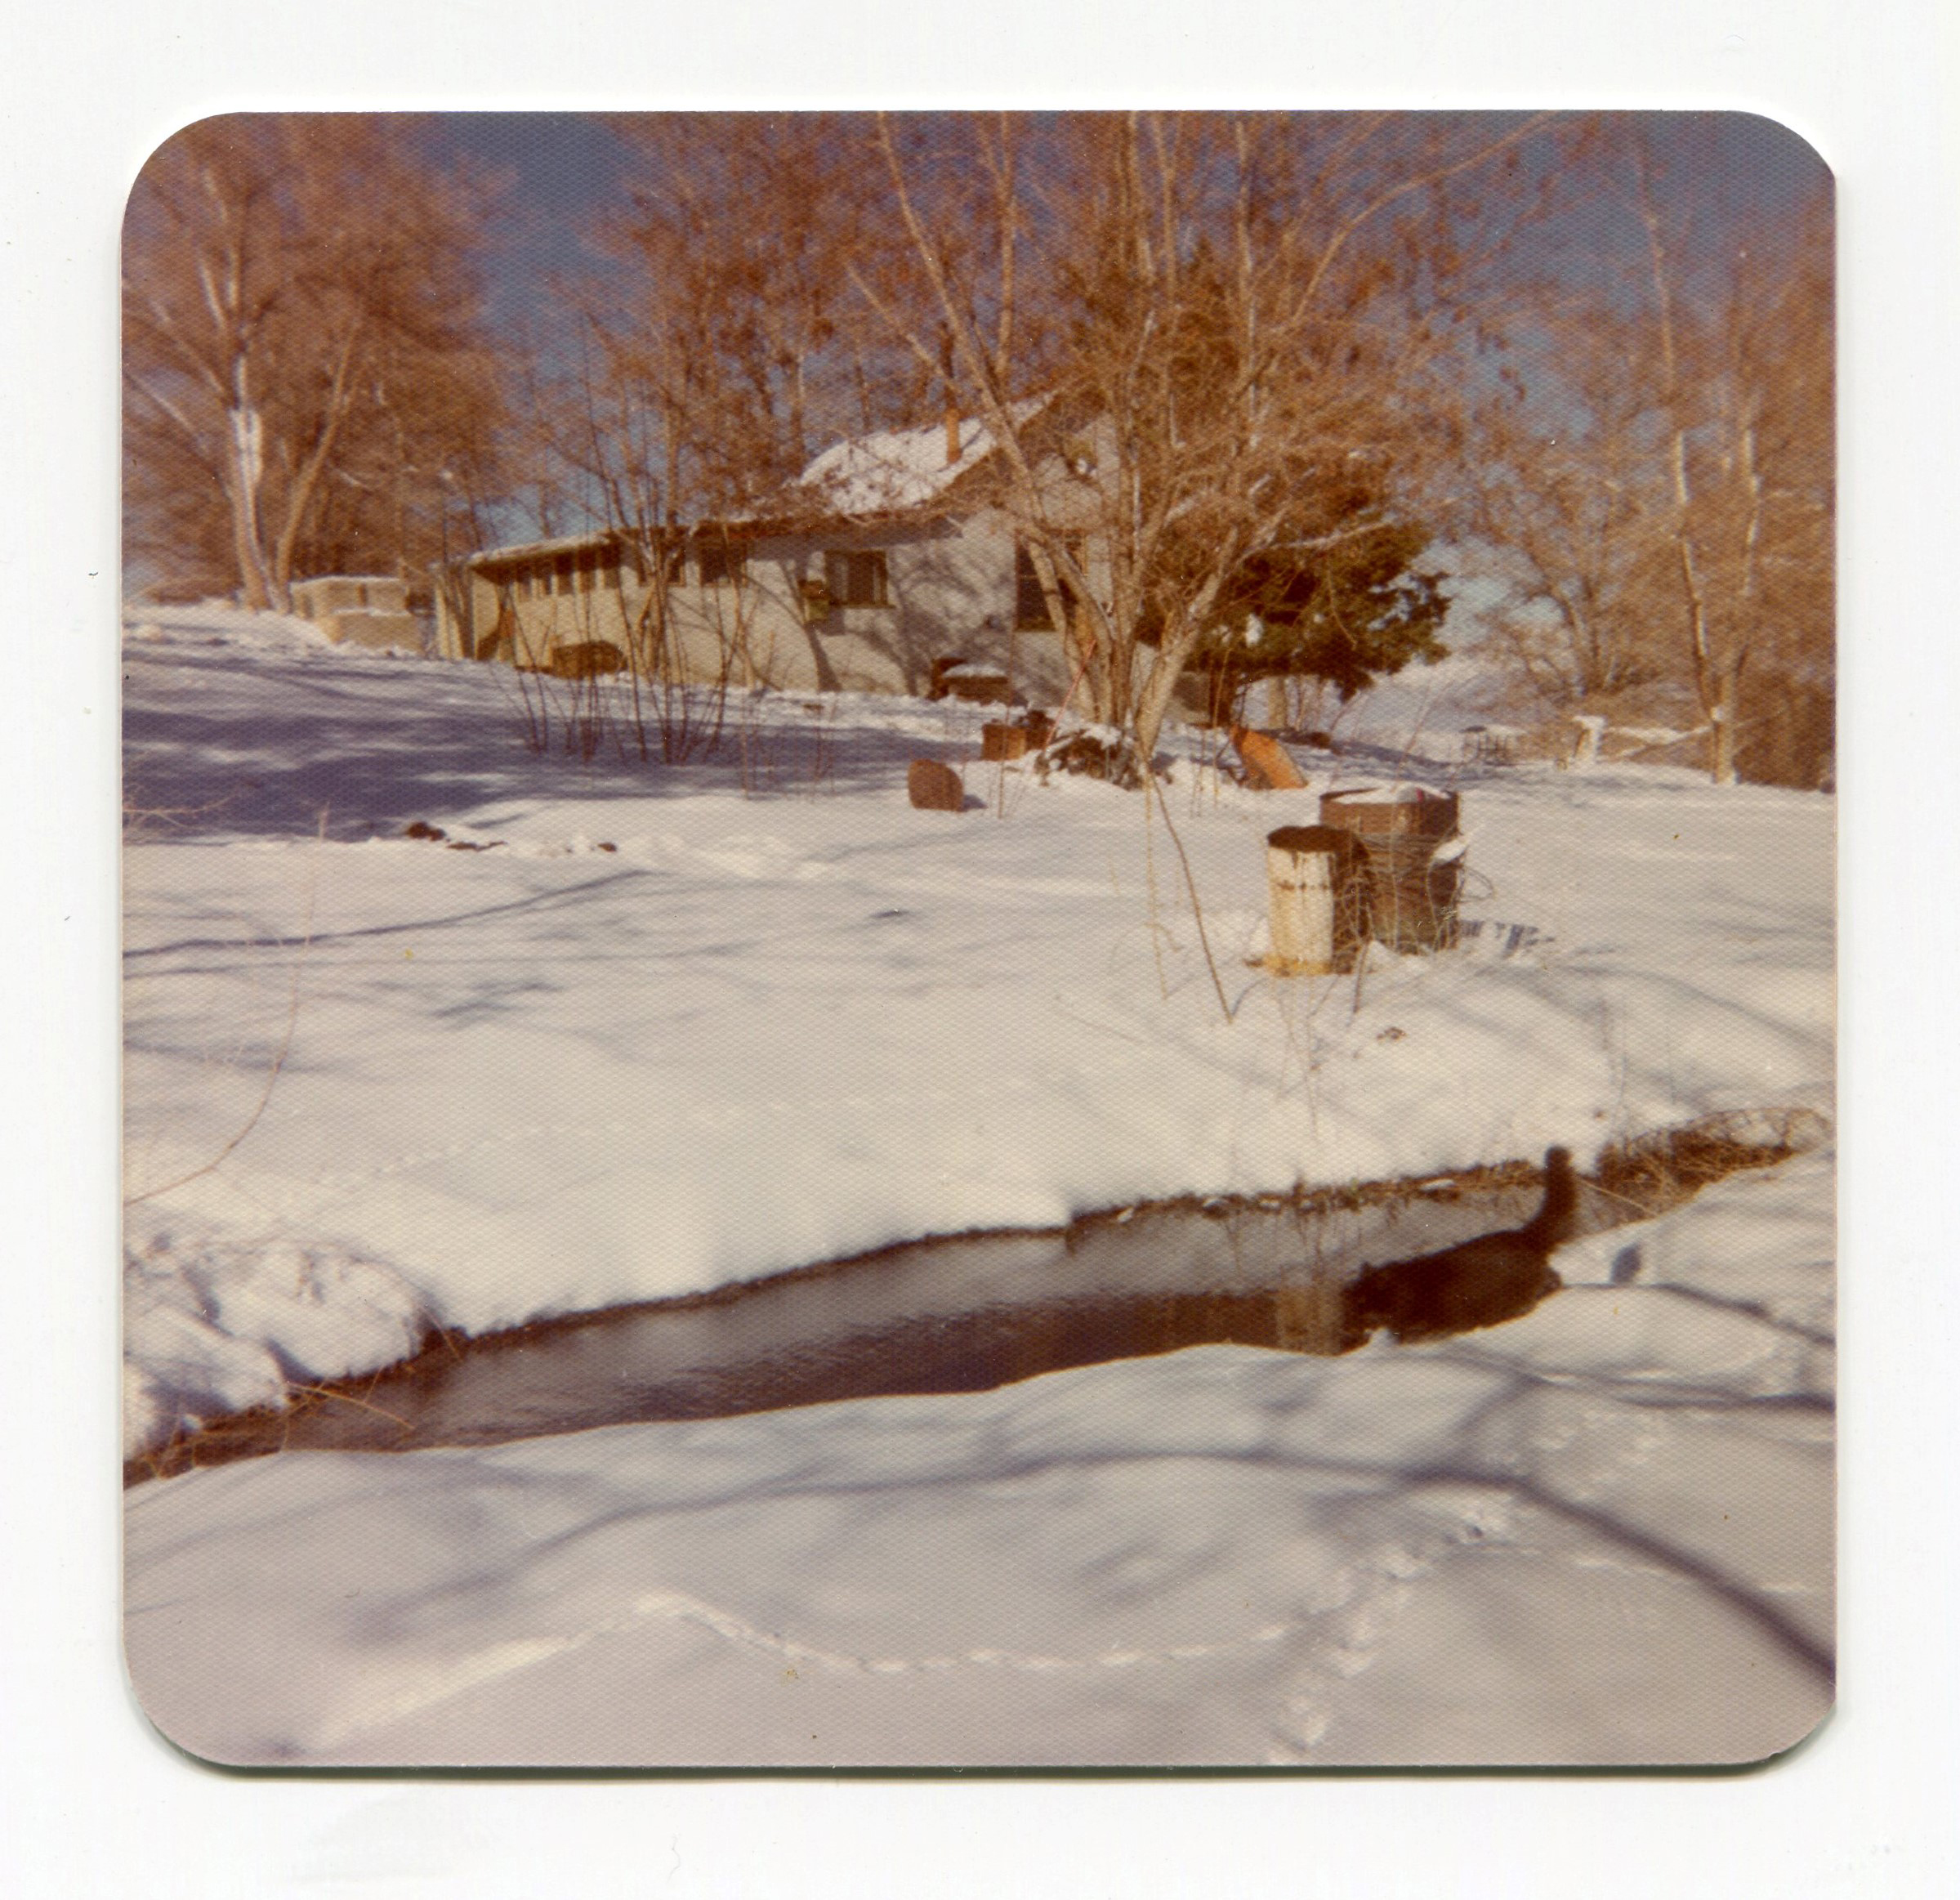 1962 Assembly of Man Ranch House - snowy day